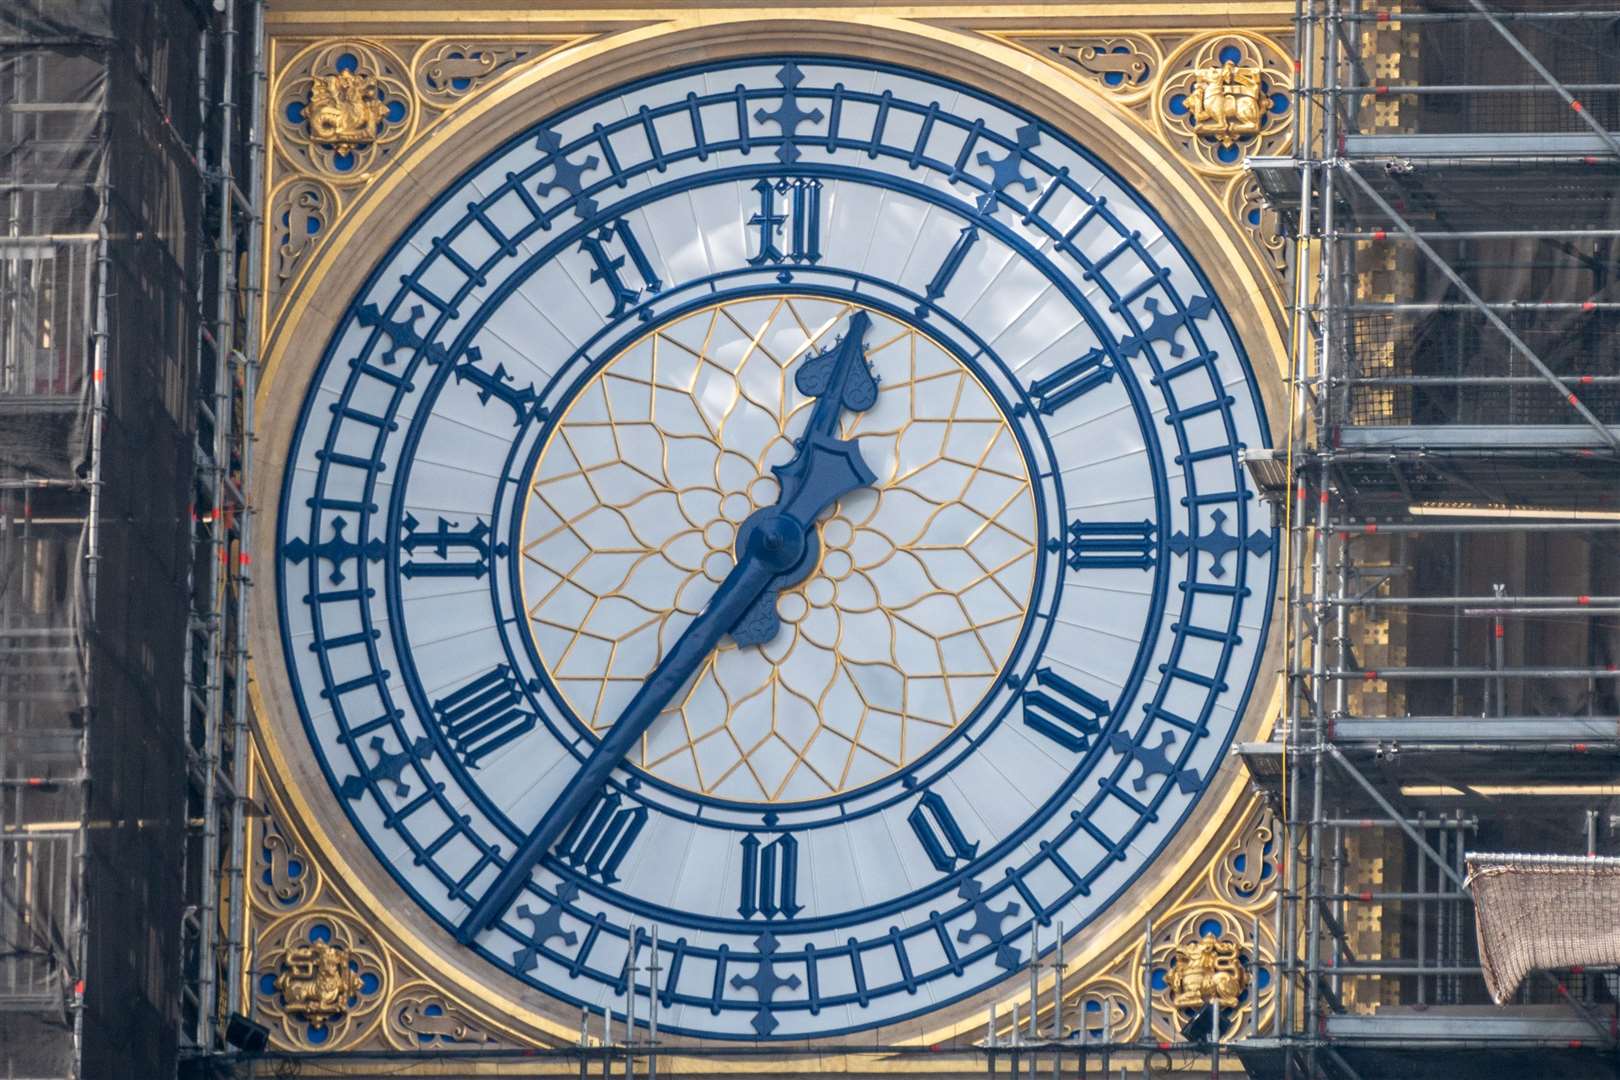 The restored clock hands at the Elizabeth Tower (Stefan Rousseau/PA)